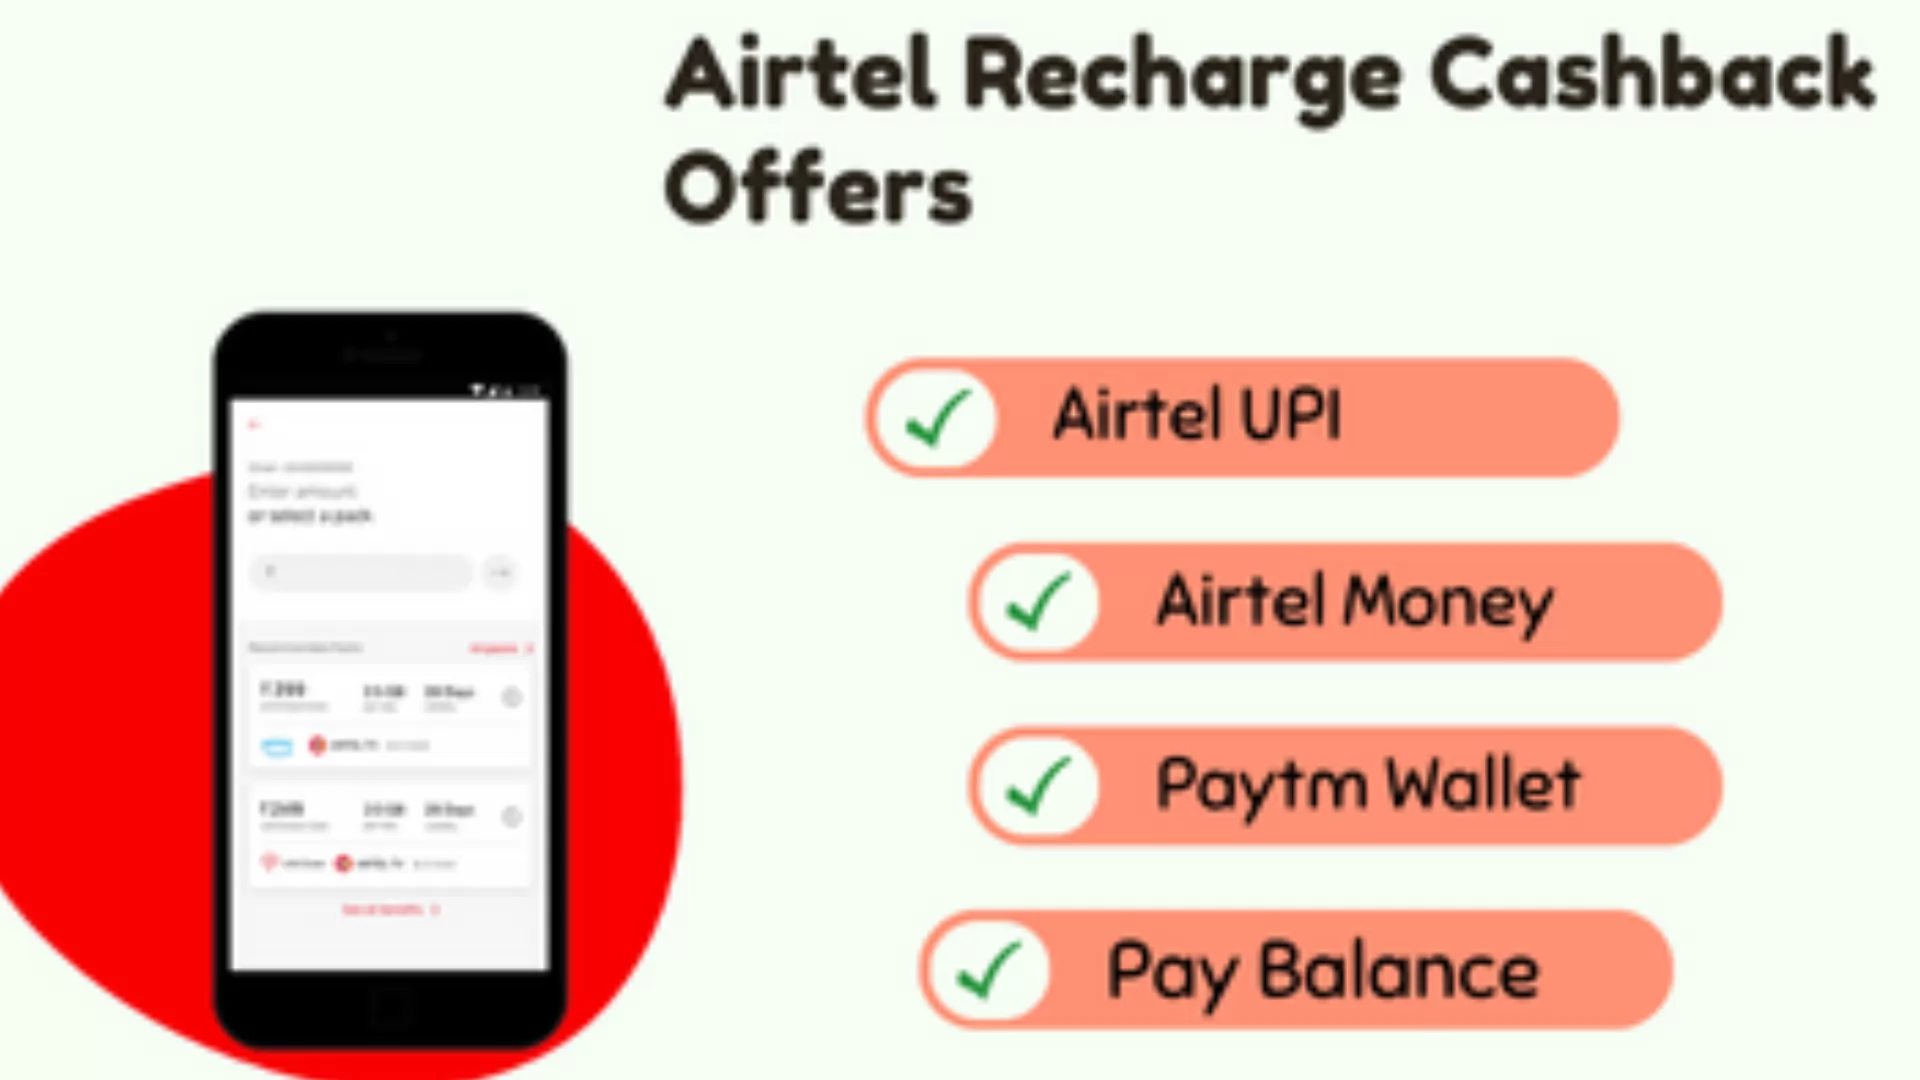 Airtel Recharge Cashback offers 